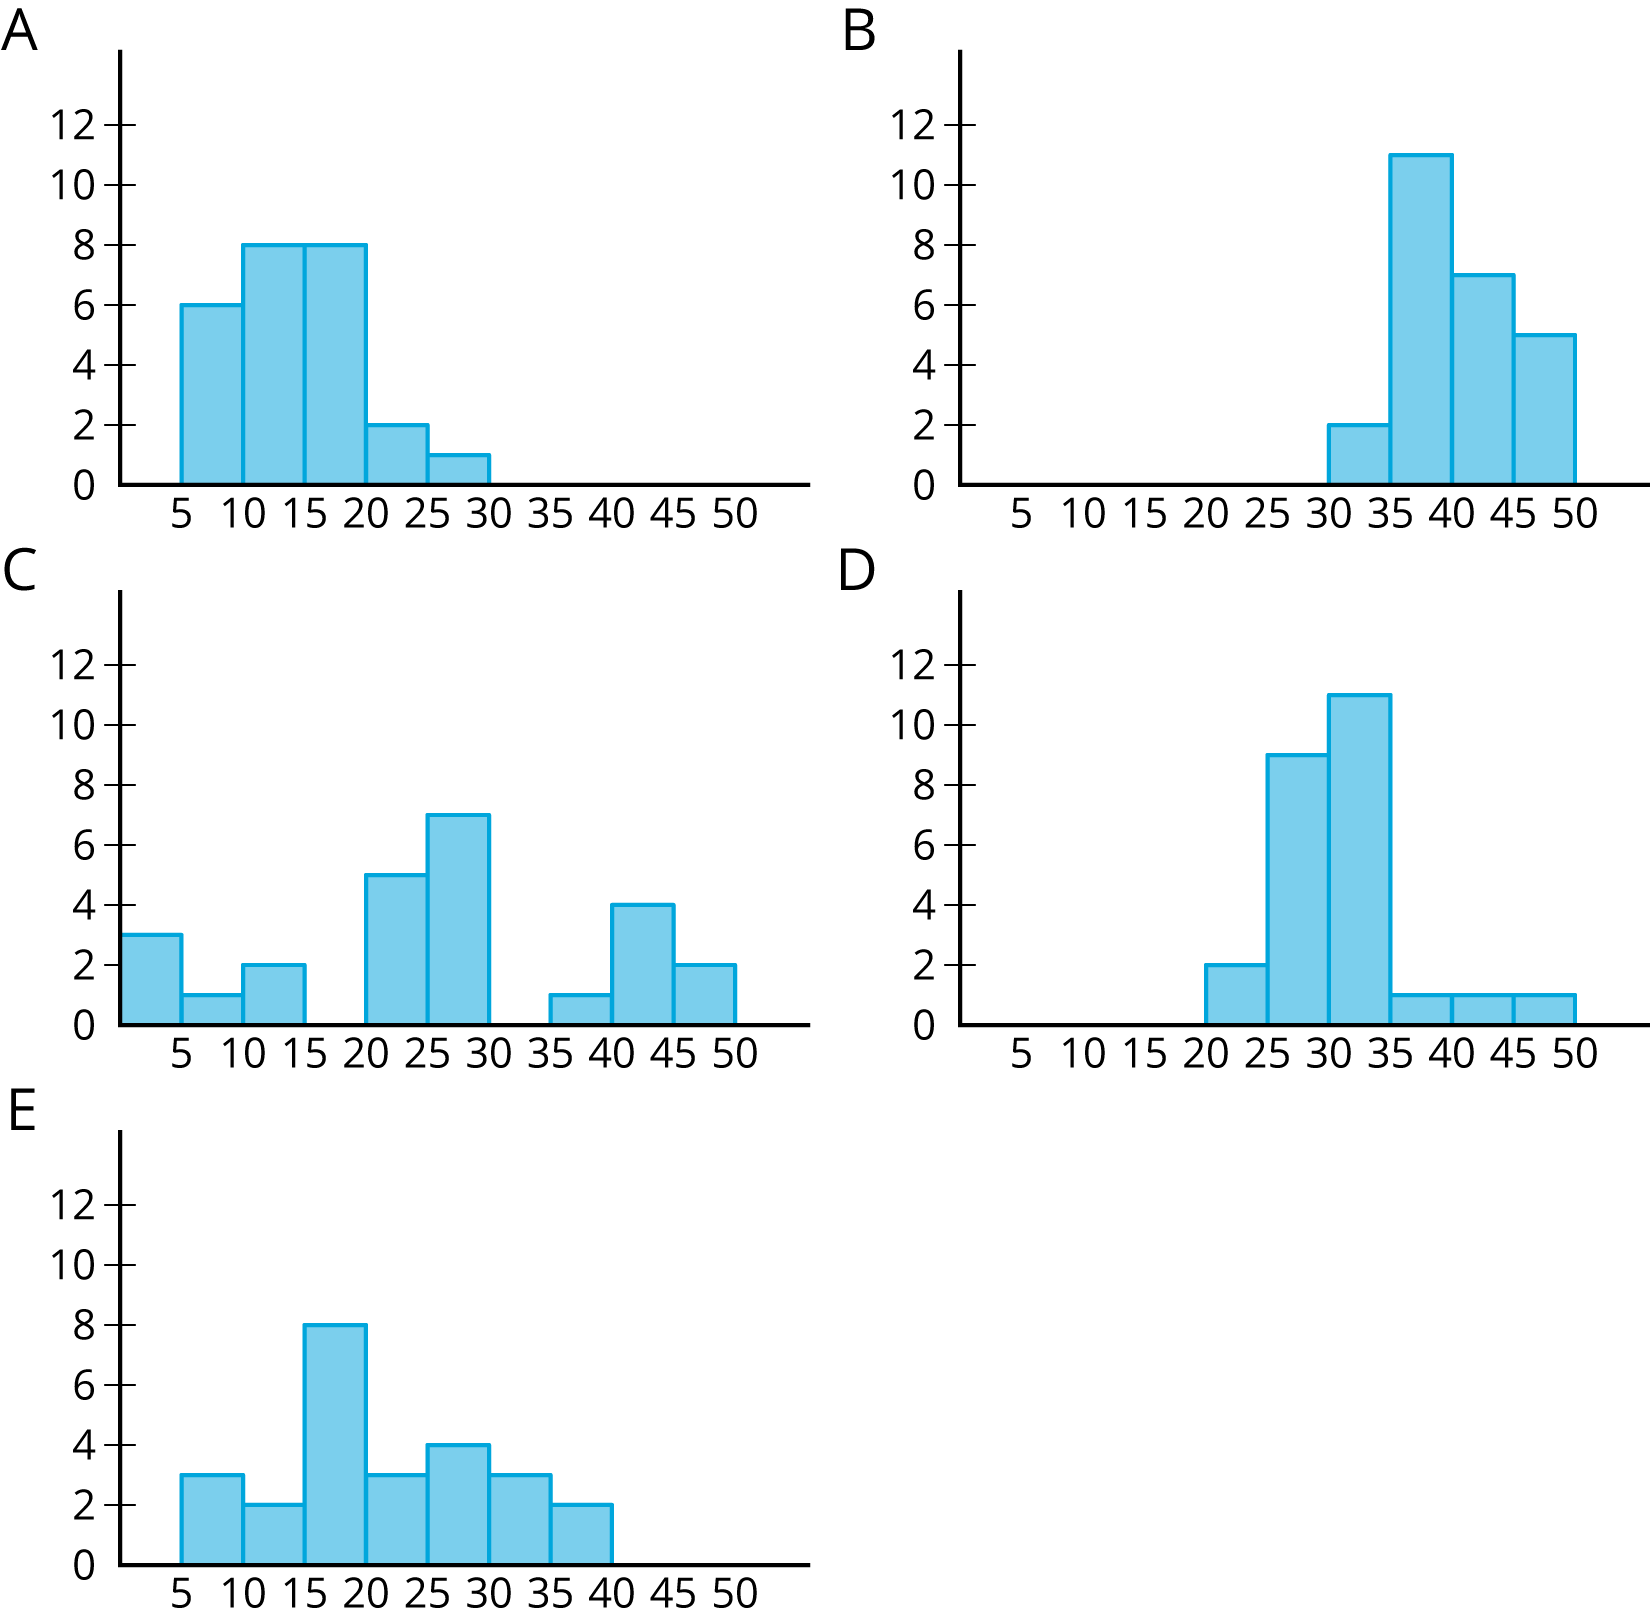 There are 5 histograms labeled A, B, C, D, and E.  Each histogram has a horizontal axis with 0 through 50, in increments of 5, are indicated.  The vertical axis has 0 through 12, in increments of 2, indicated.  The height of the bars for “histogram A” are as follows:  from 5 up to 10, 6; from 10 up to 15, 8, from 15 up to 20, 8; from 20 up to 25, 2; from 25 up to 30, 1. The height of the bars “histogram B” are as follows:  from 30 up to 35, 2; from 35 up to 40, 11; from 40 up to 45, 7; from 45 up to 50, 5. The height of the bars for “histogram C” are as follows:  from 0 up to 5, 3; from 5 up to 10, 1; from 10 up to 15, 2; from 15 up to 20, 0; from 20 up to 25, 5; from 25 up to 30, 7; from 30 up to 35, 0; from 35 up to 40, 1; from 40 up to 45, 4; from 45 up to 50; 2. The height of the bars for “histogram D” are as follows:  from 20 up to 25, 2; from 25 up to 30, 9; from 30 up to 35, 11; from 35 up to 40, 1; from 40 up to 45, 1; from 45 up to 50, 1. The height of the bars for “histogram E” are as follows:  from 5 up to 10, 3; from 10 up to 15, 2; from 15 up to 20, 8; from 20 up to 25, 3; from 25 up to 30, 4; from 30 up to 35, 3; from 35 up to 40, 2.